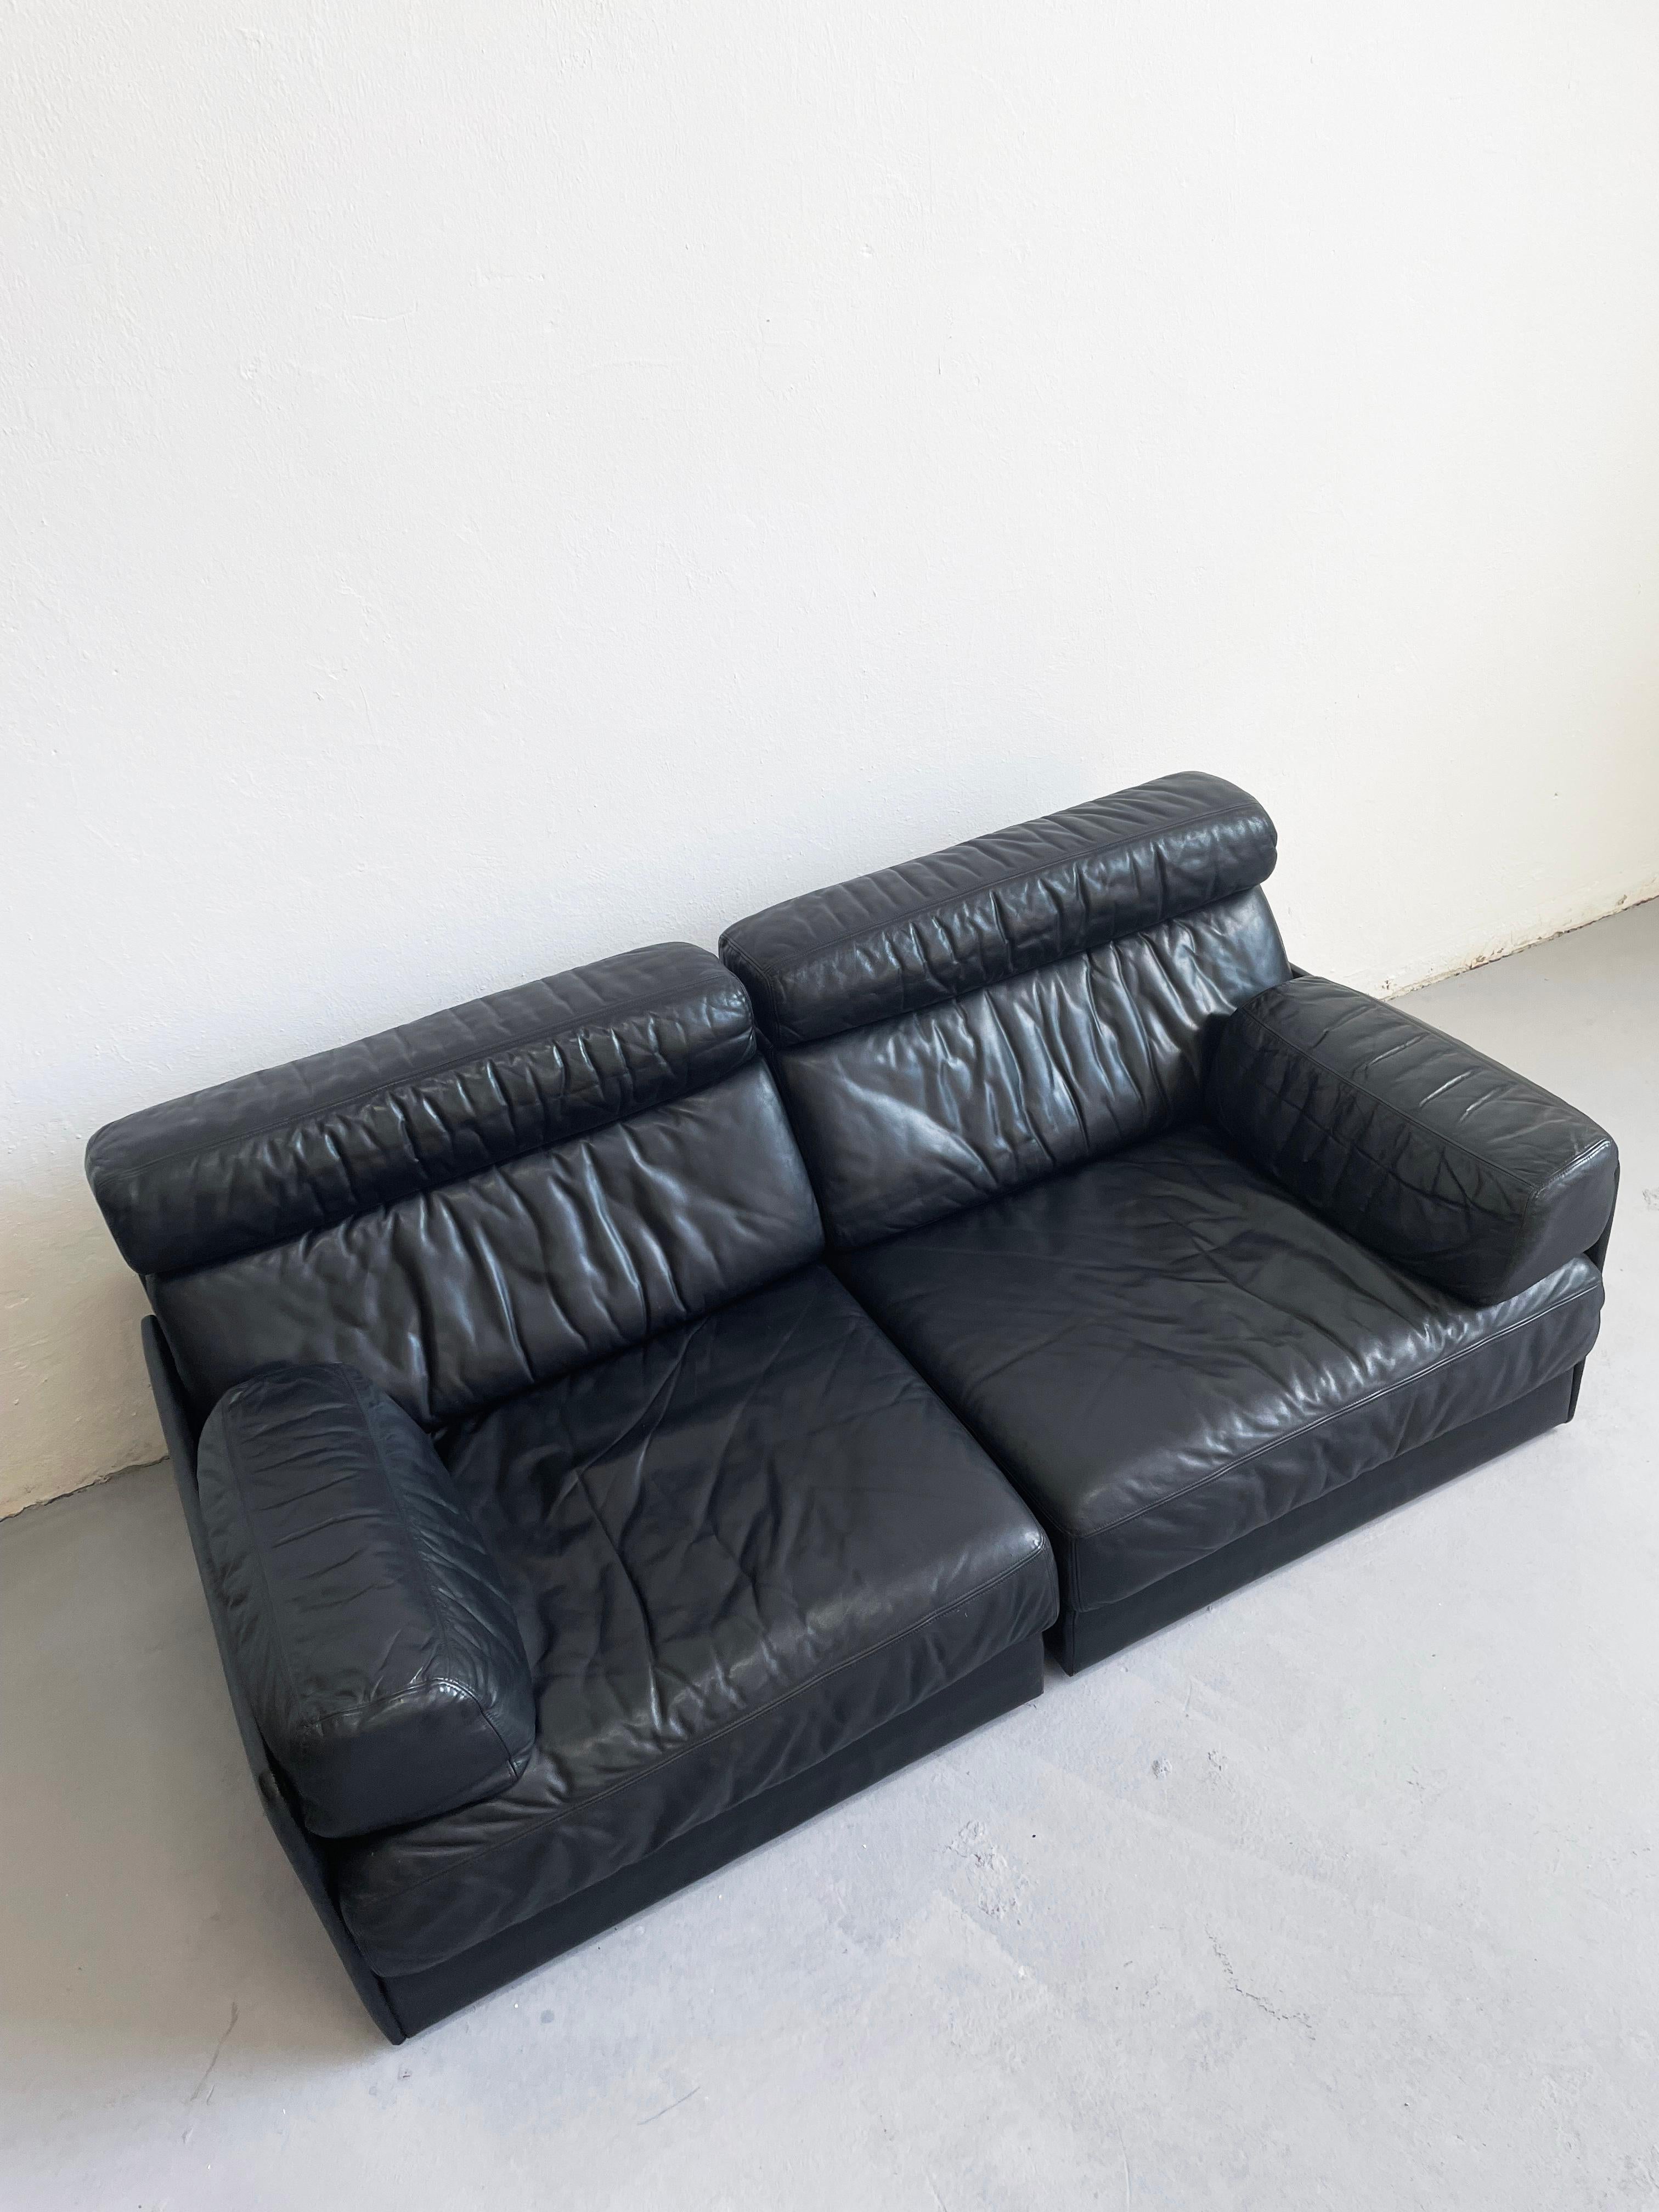 Vintage De Sede Modular Two Seater 'DS-77' Sofa Bed in Black Leather 1